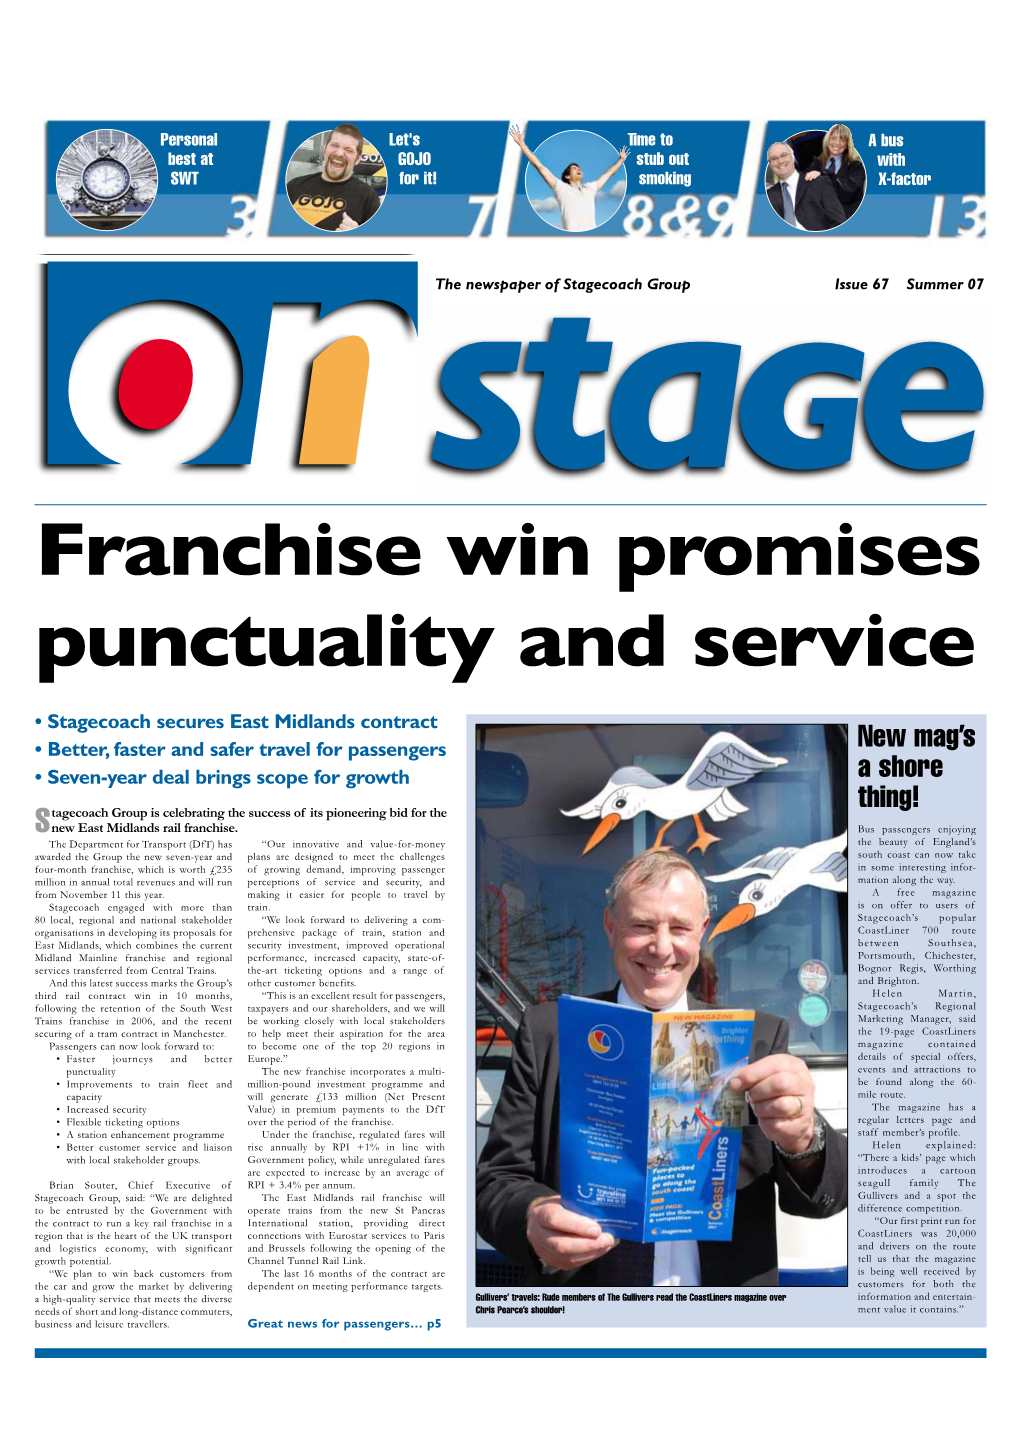 Franchise Win Promises Punctuality and Service